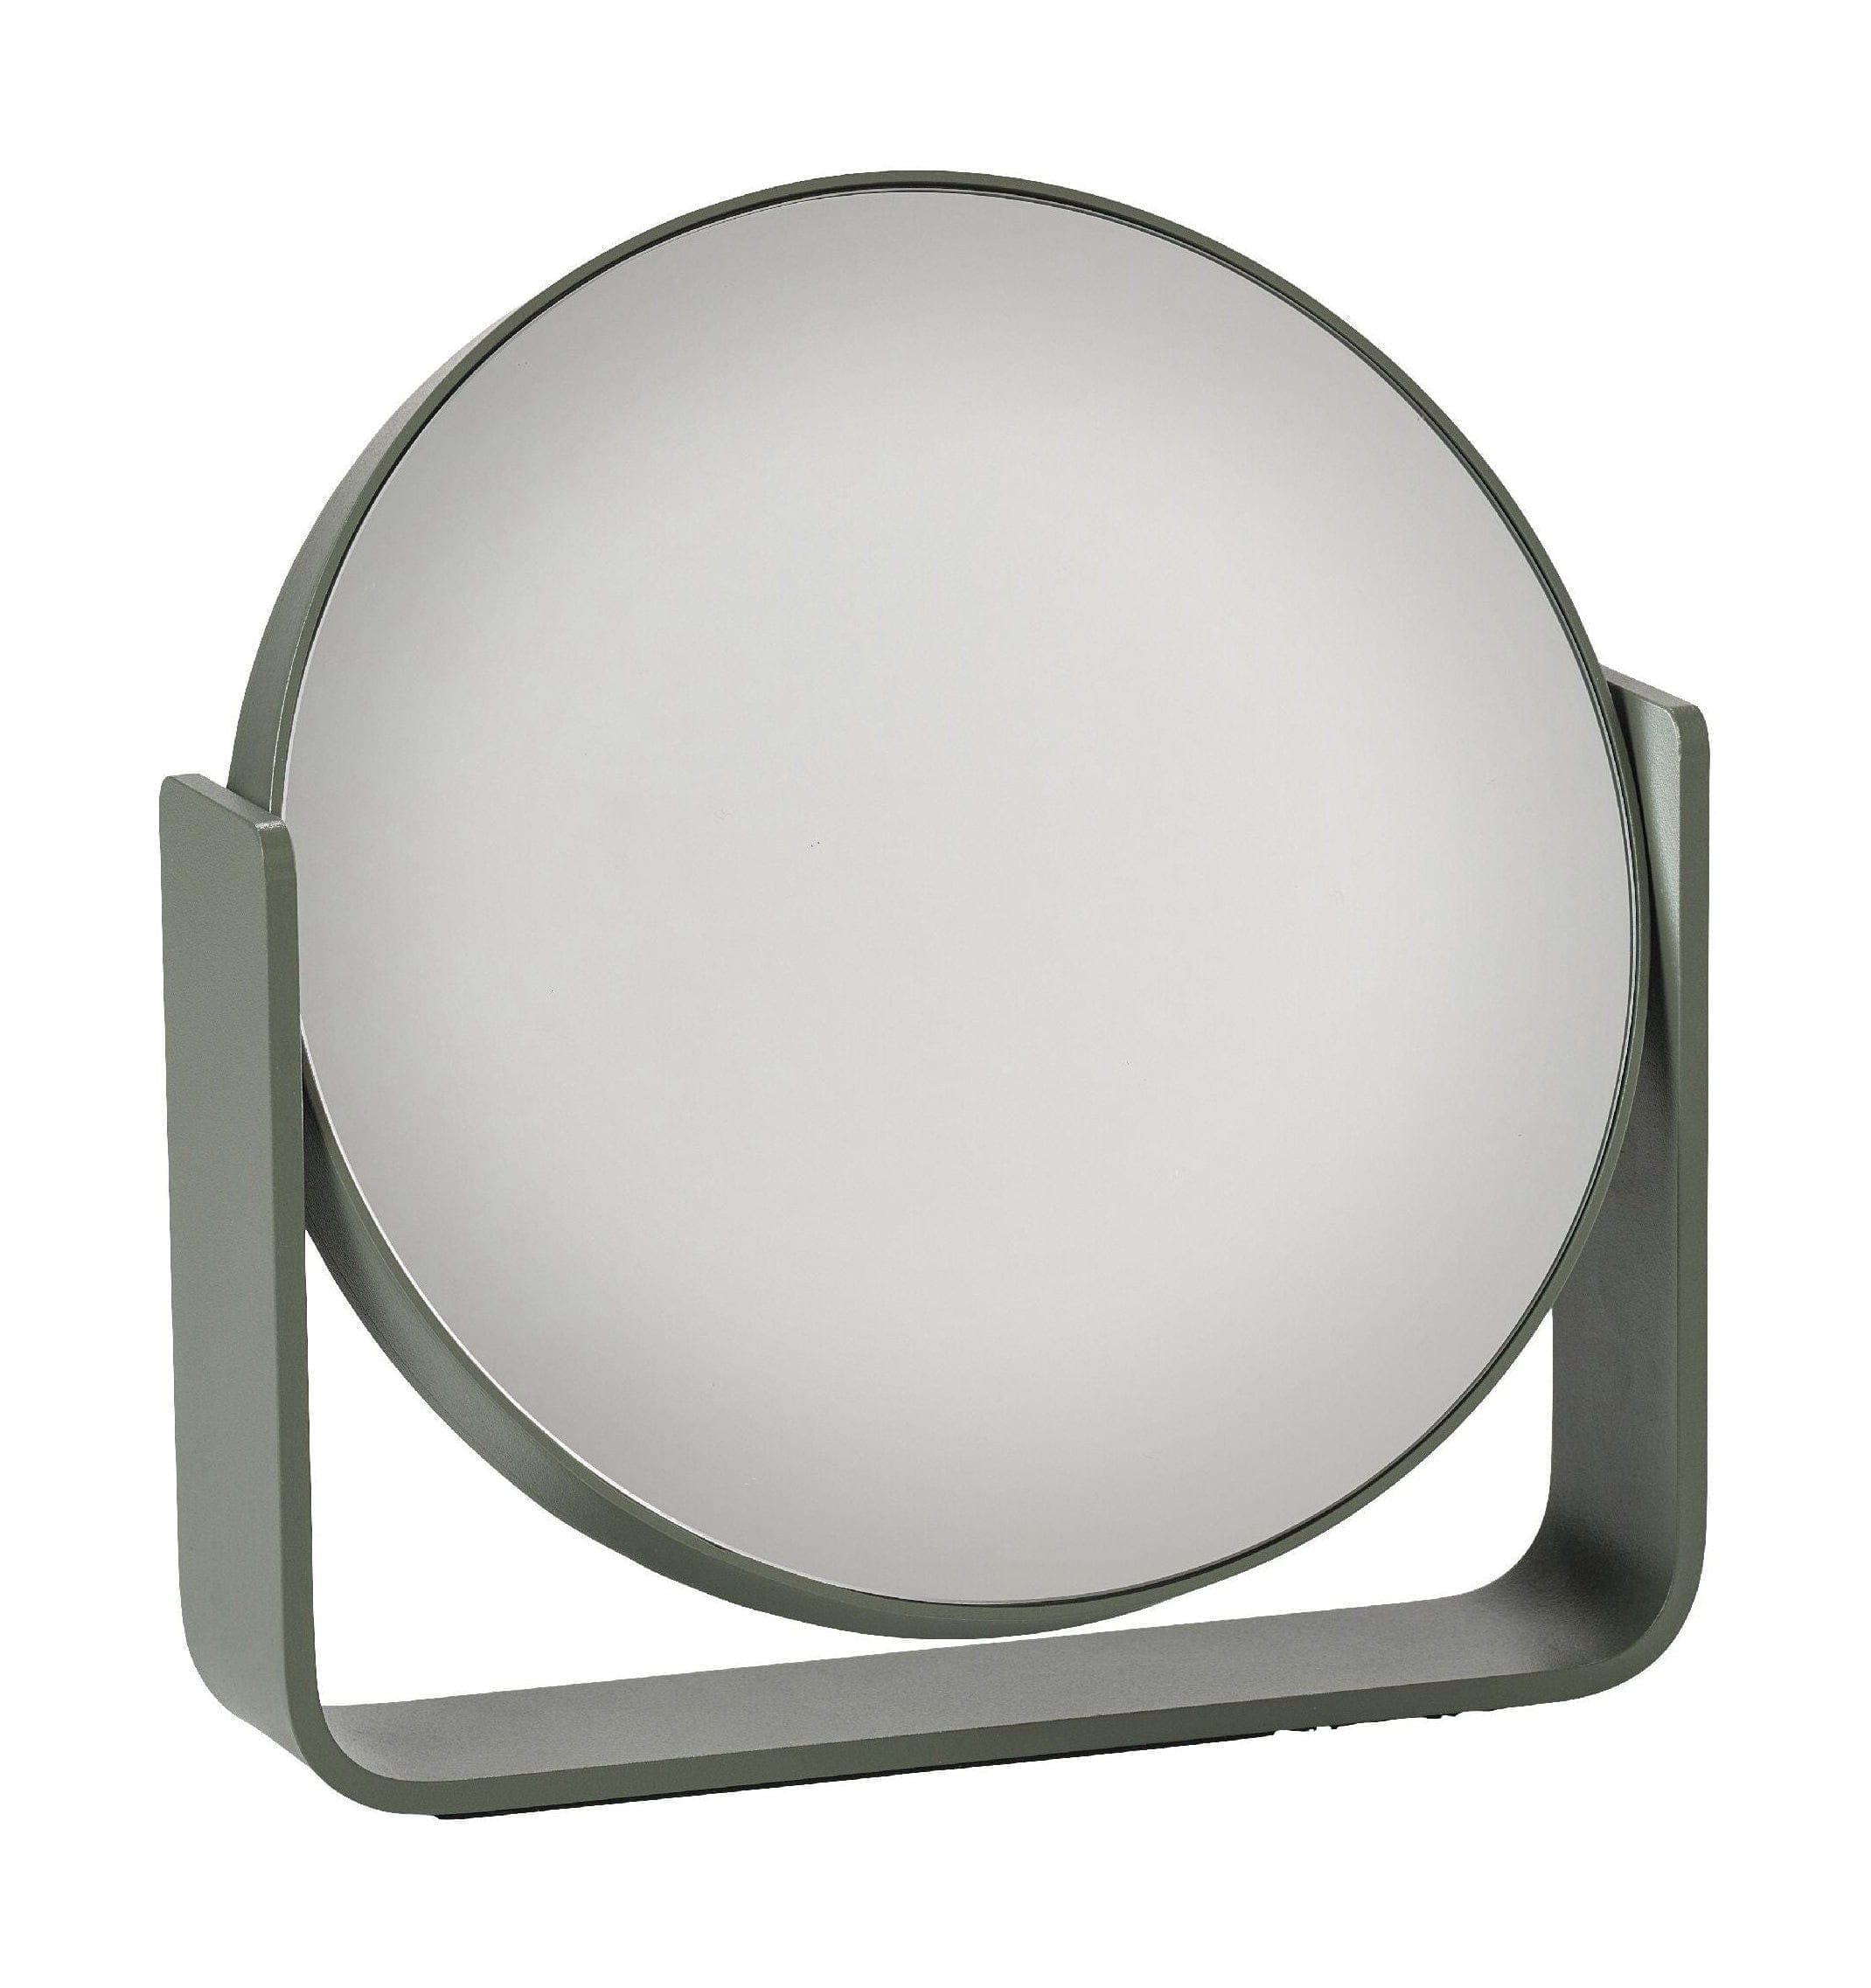 Zone Denmark Ume Table Mirror, Olive Green